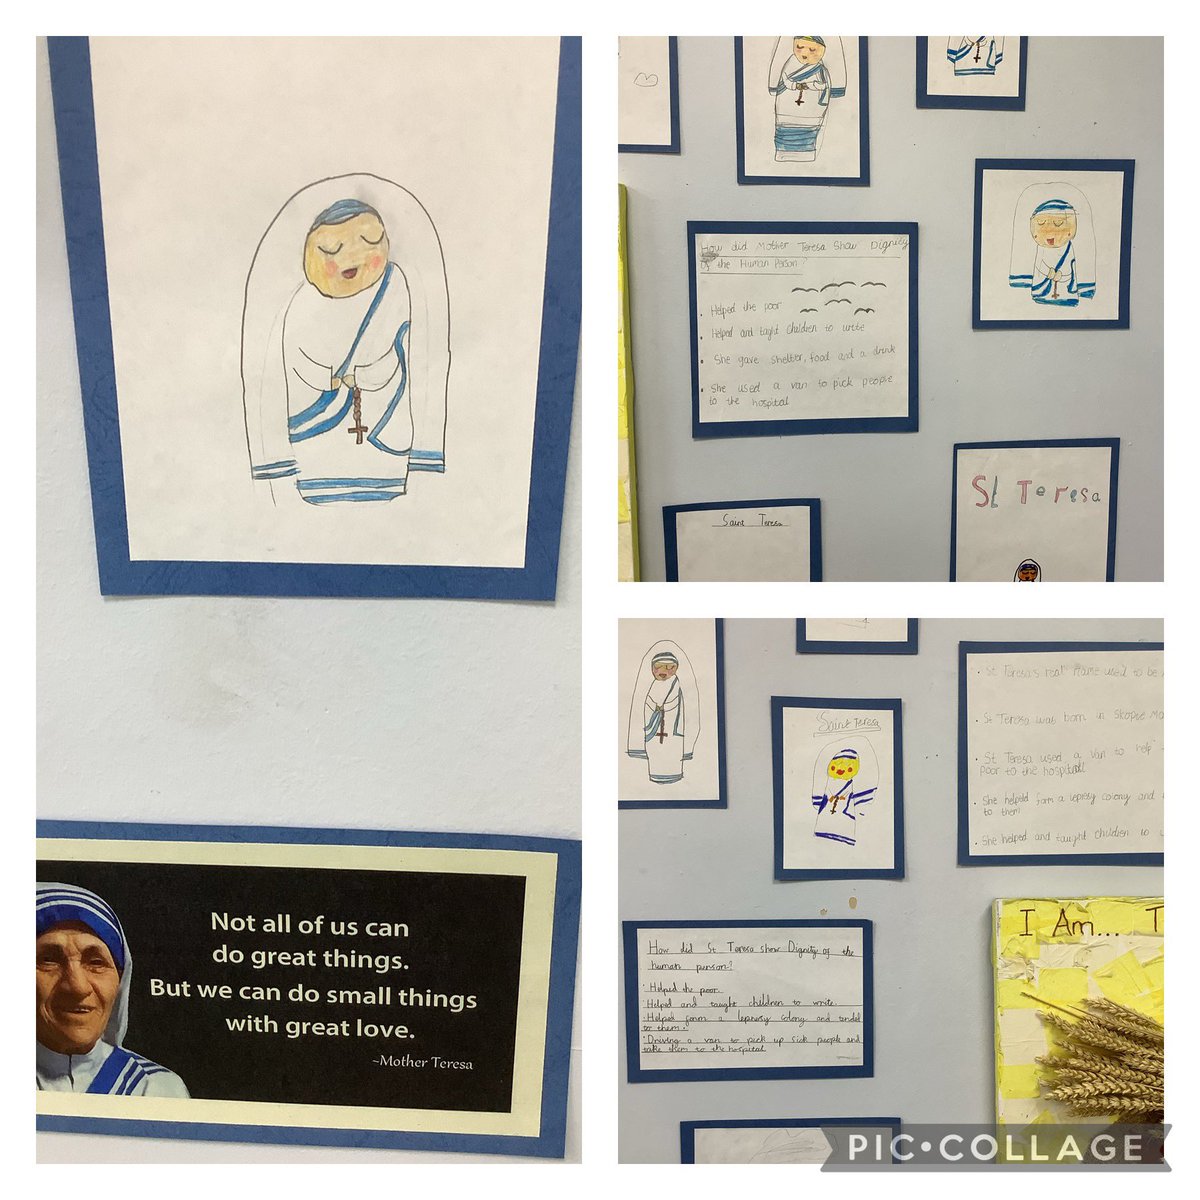 Year 4 celebrated the Feast Day of St Teresa of Calcutta by learning how St Teresa demonstrated Dignity of the Human Person during her life #StTeresa #BuildingTheKingdom